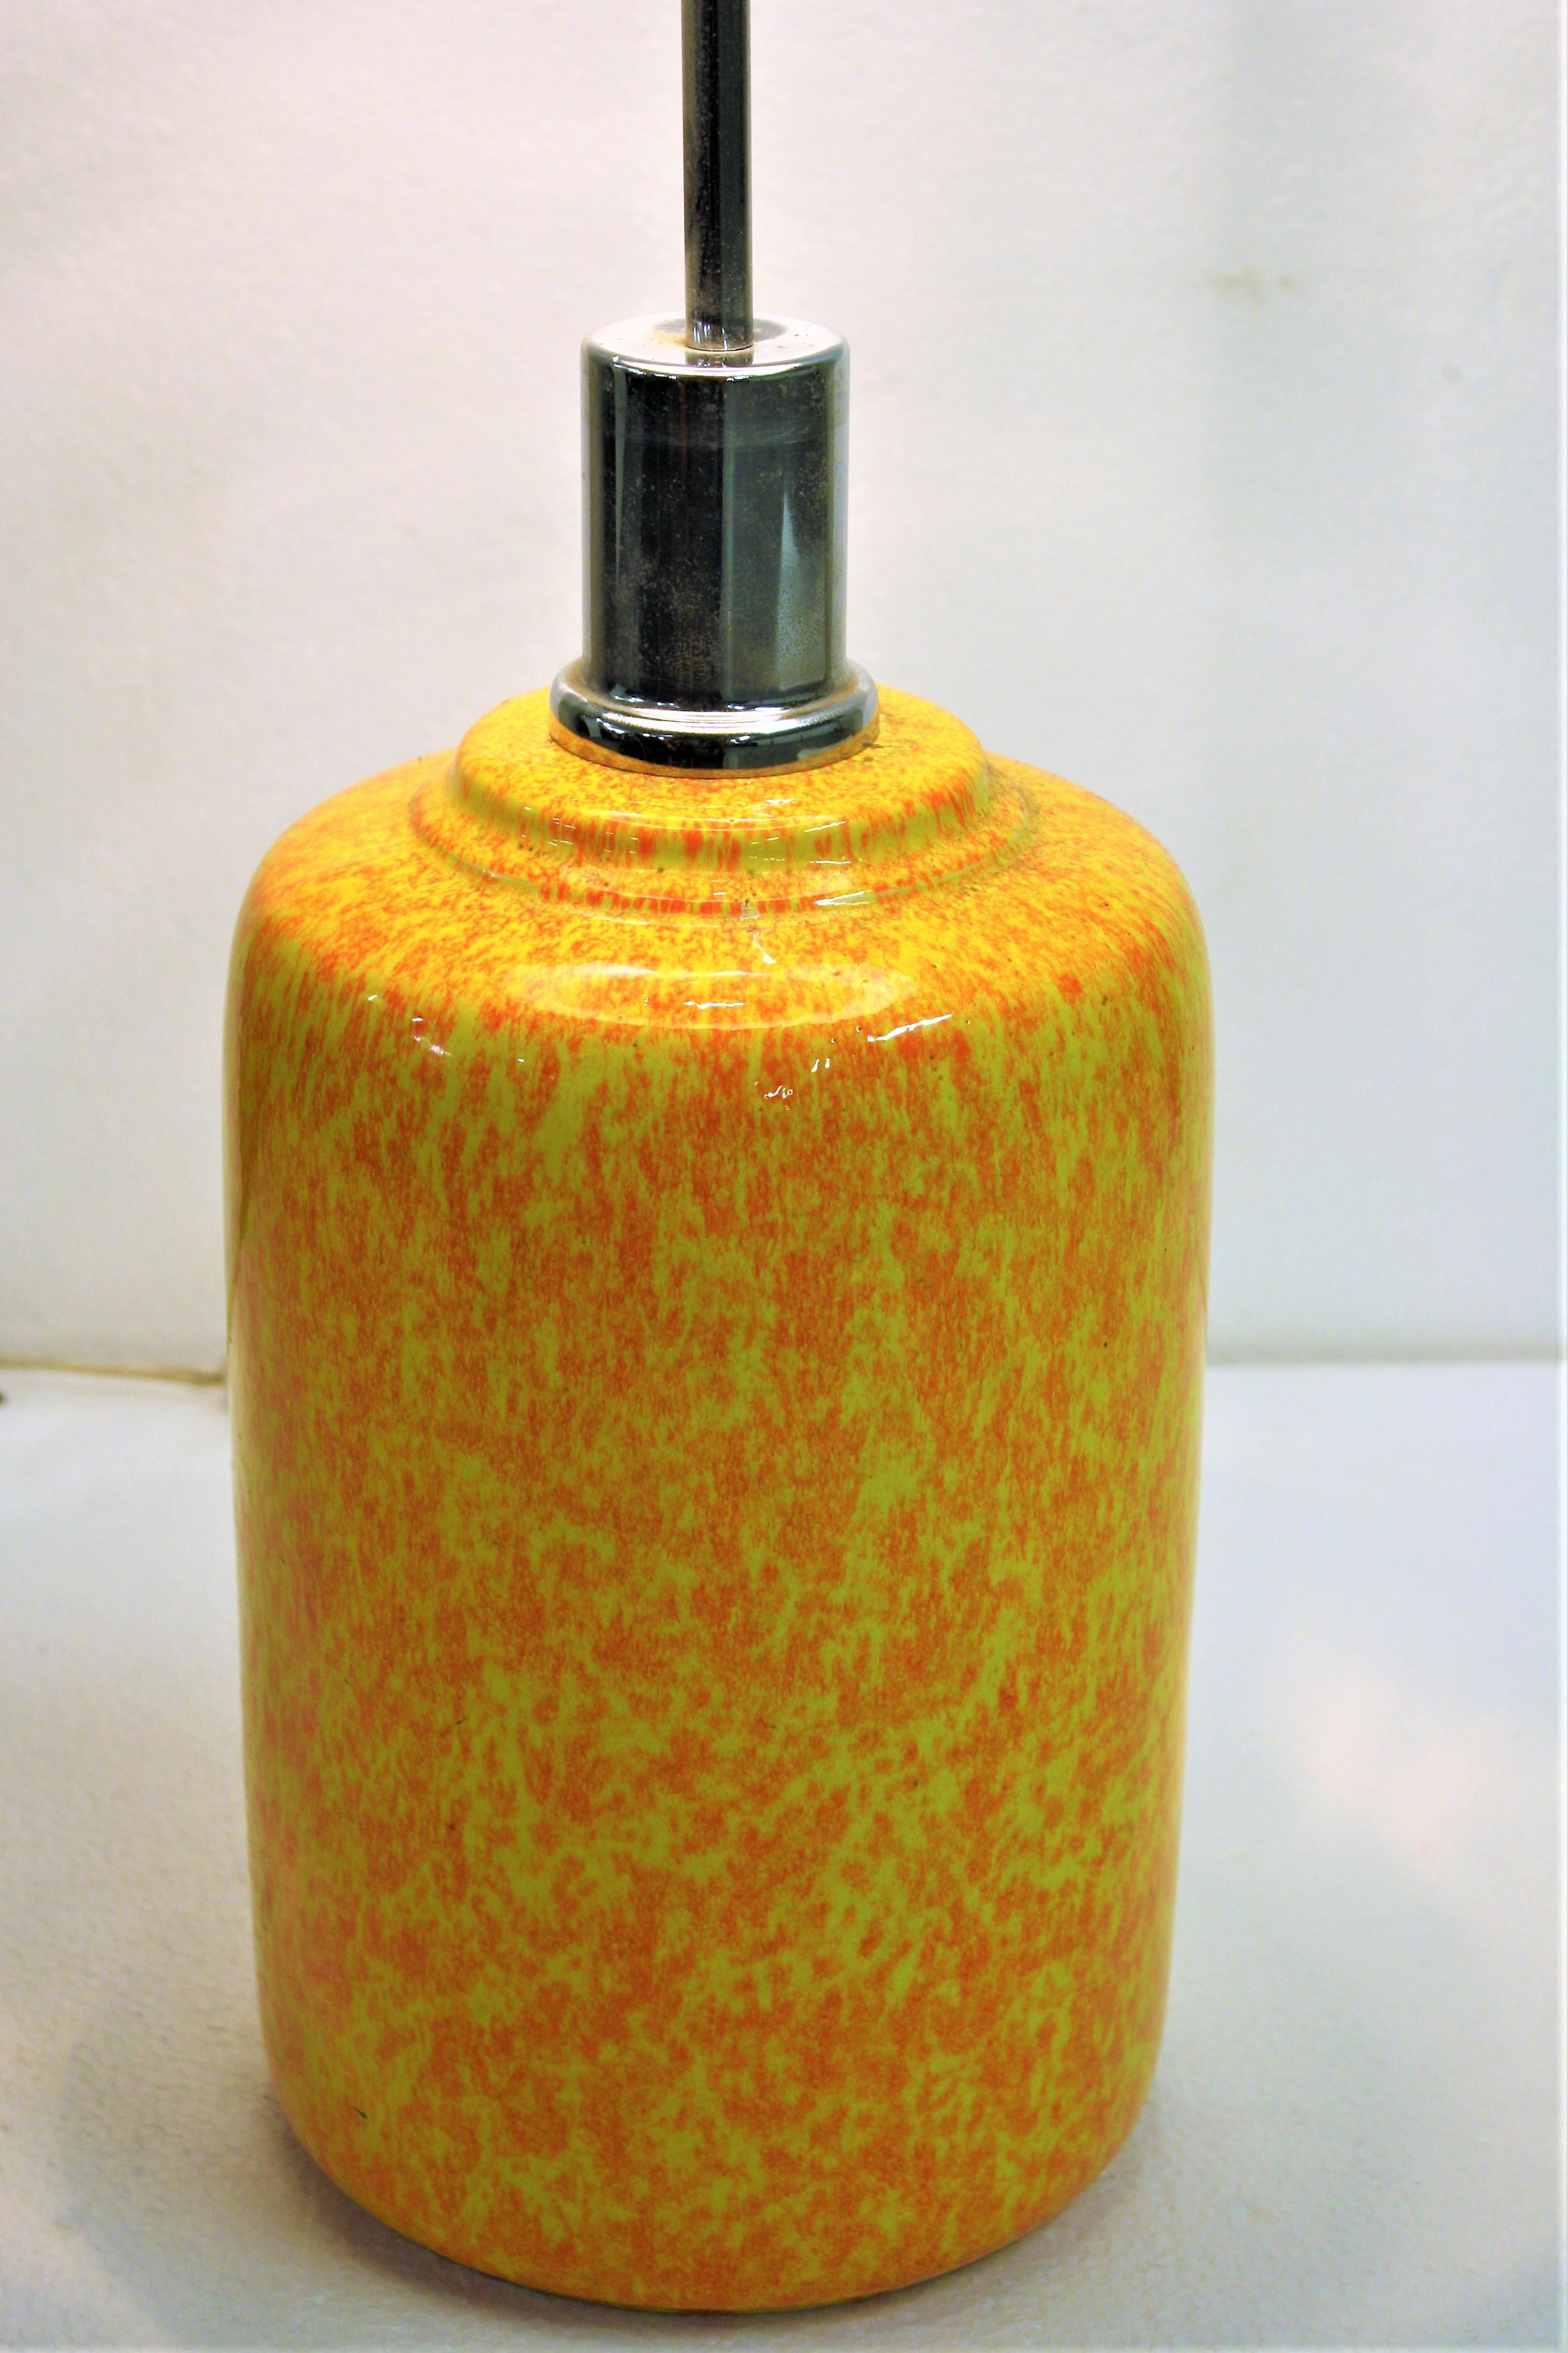 Midcentury yellow and orange stained ceramic table lamp.

The table lamp is unusually high with a chromed steel rod.

This colorful lamp is in good condition, without any chips or damages.

Tested and ready for use with a regular E26/E27 light